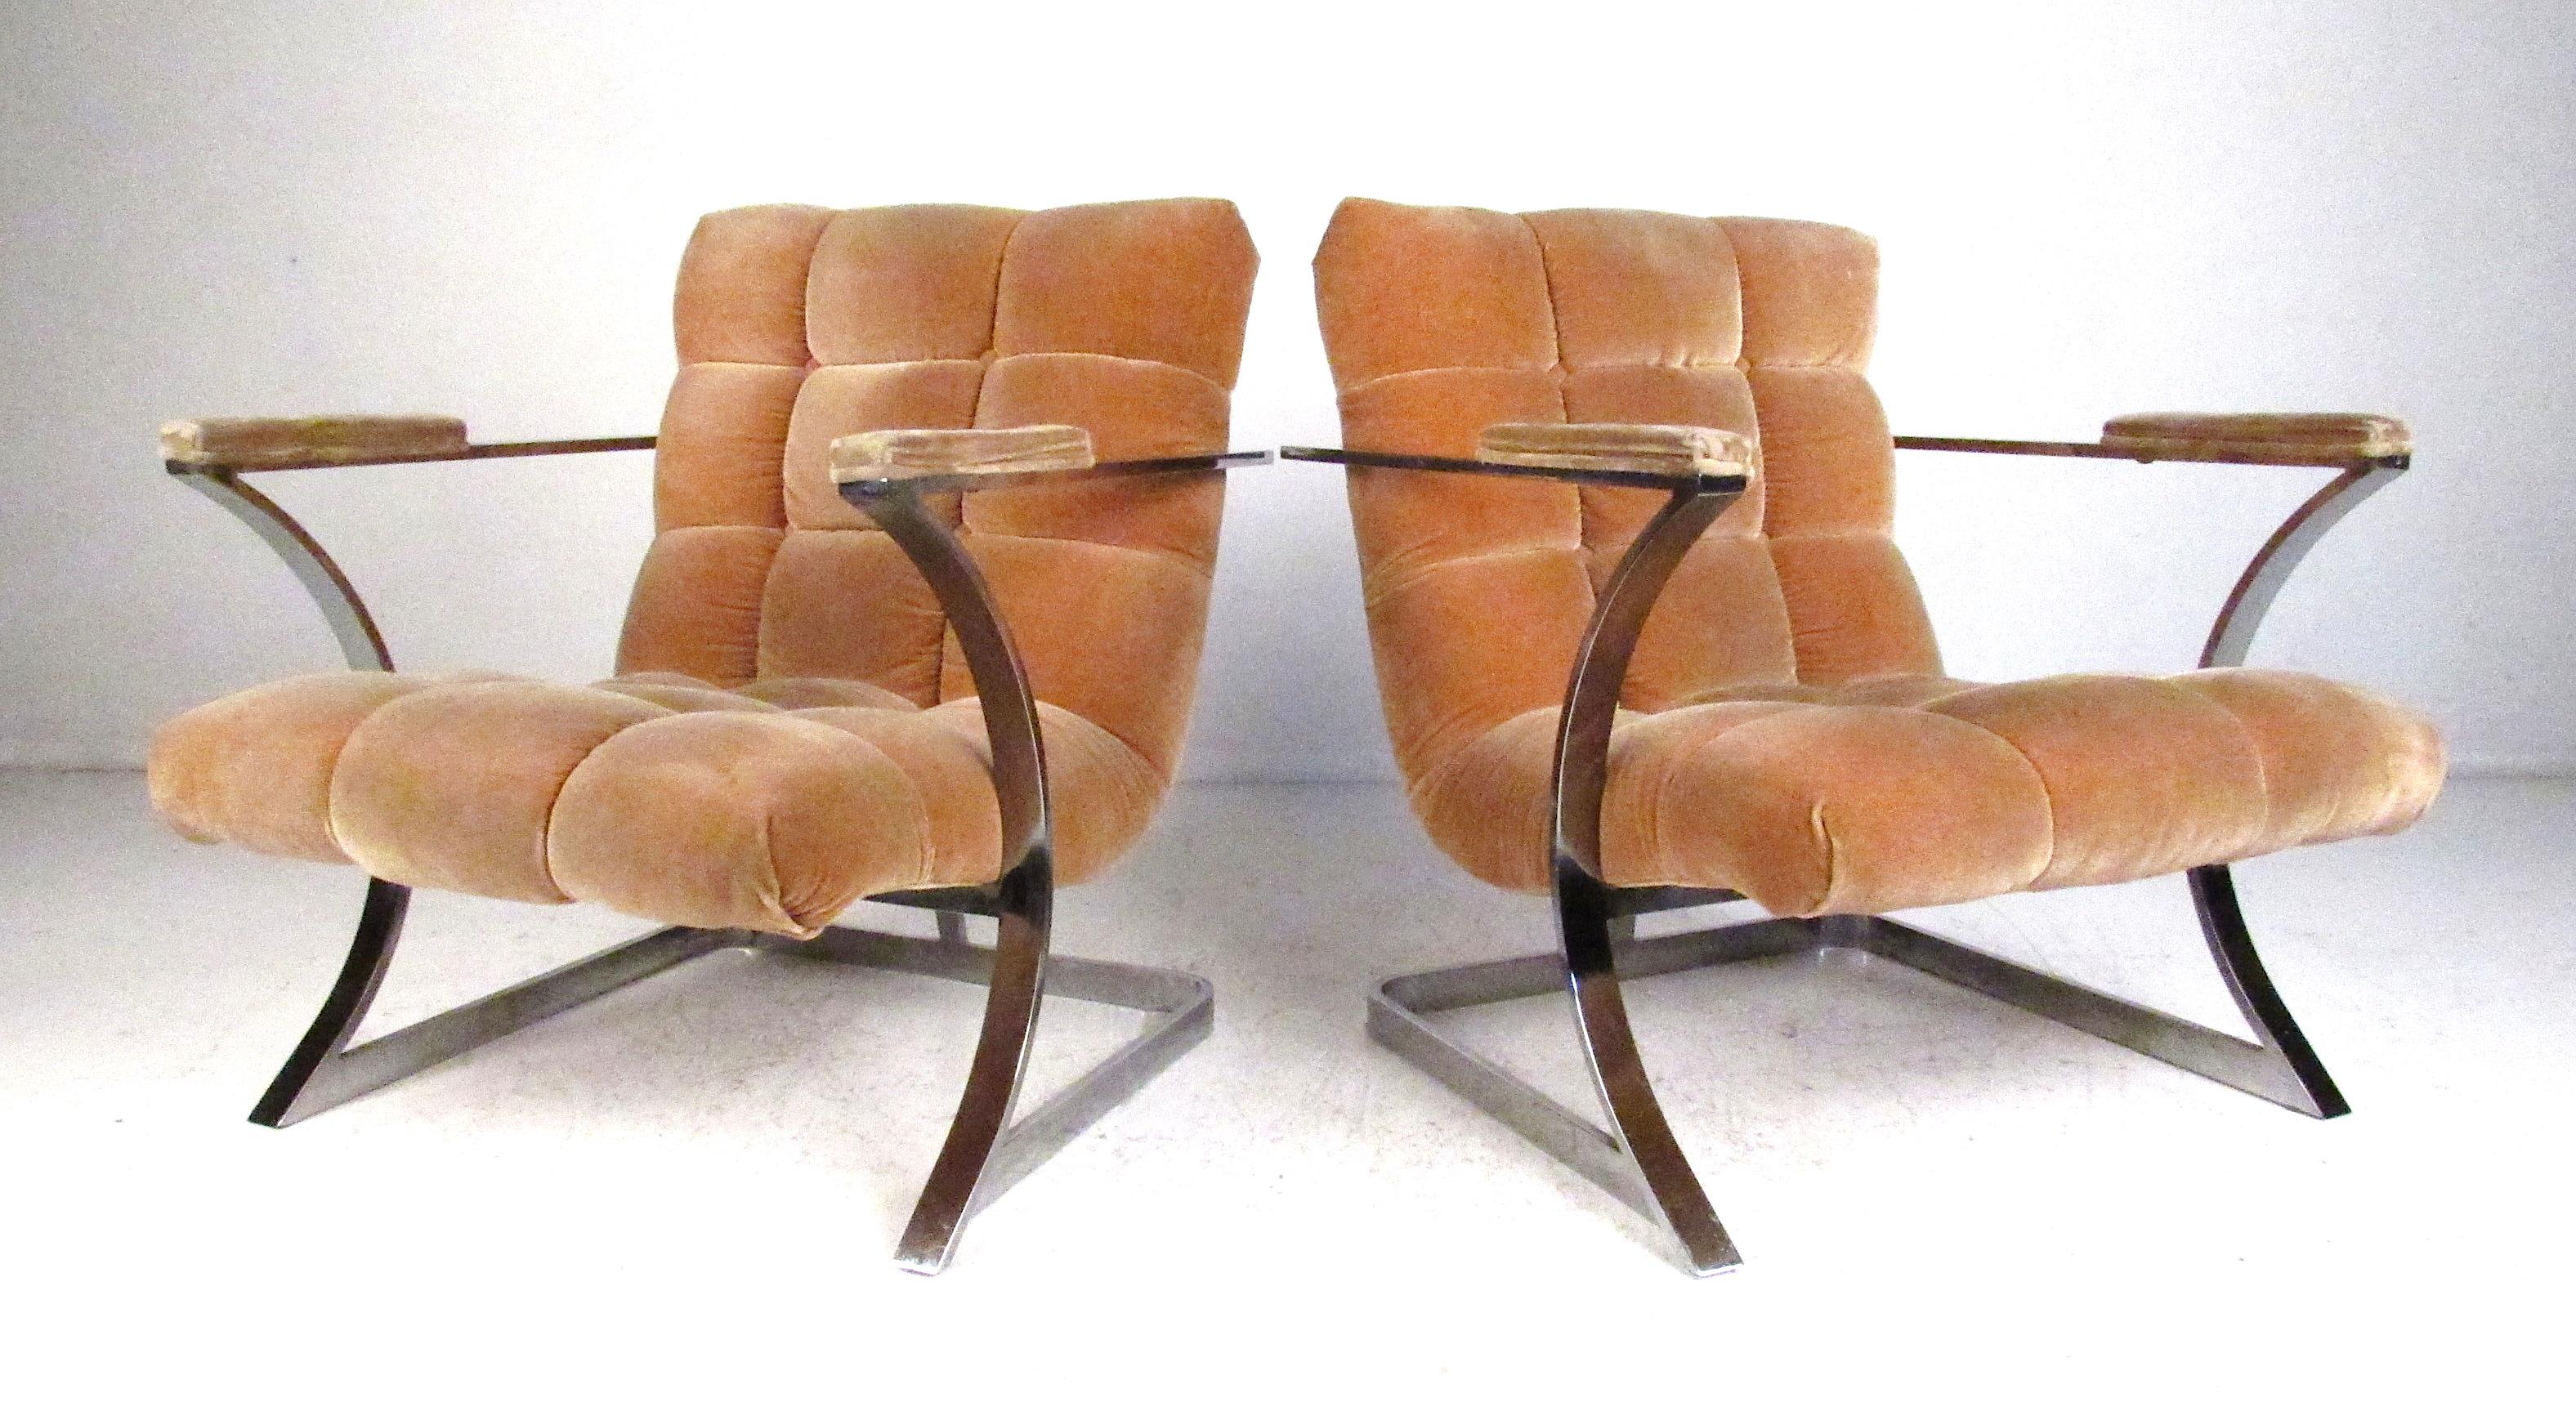 Pair of Mid-Century Modern floating sling chairs by Carsons, high point, North Carolina. Flat stock chrome frames support tufted upholstery creating classic midcentury styling with a modern aesthetic. Please confirm item location (NY or NJ) with